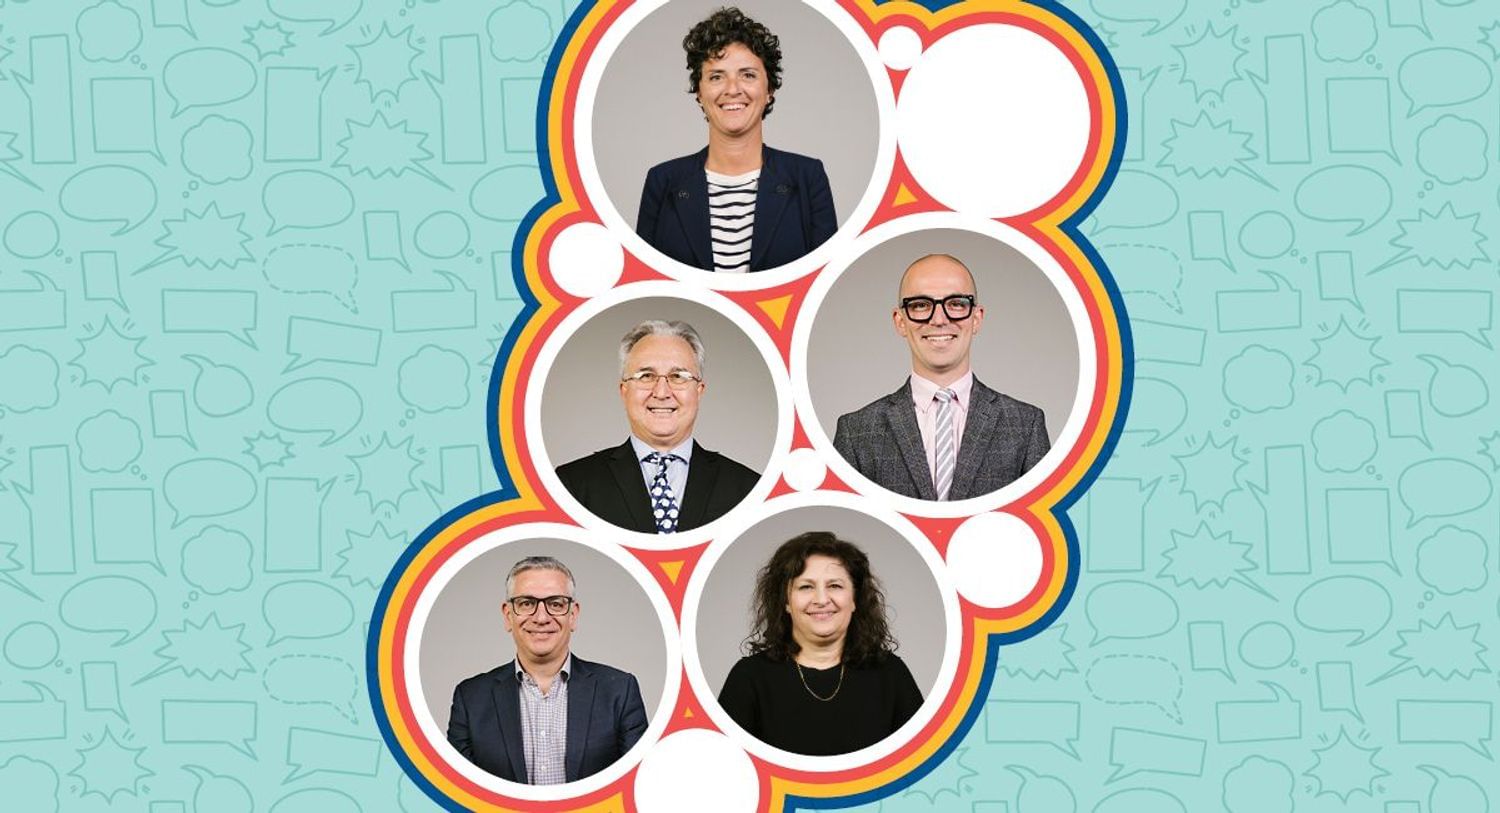 Five members of the ADA Board against a brightly coloured FDIWDC23 circular background